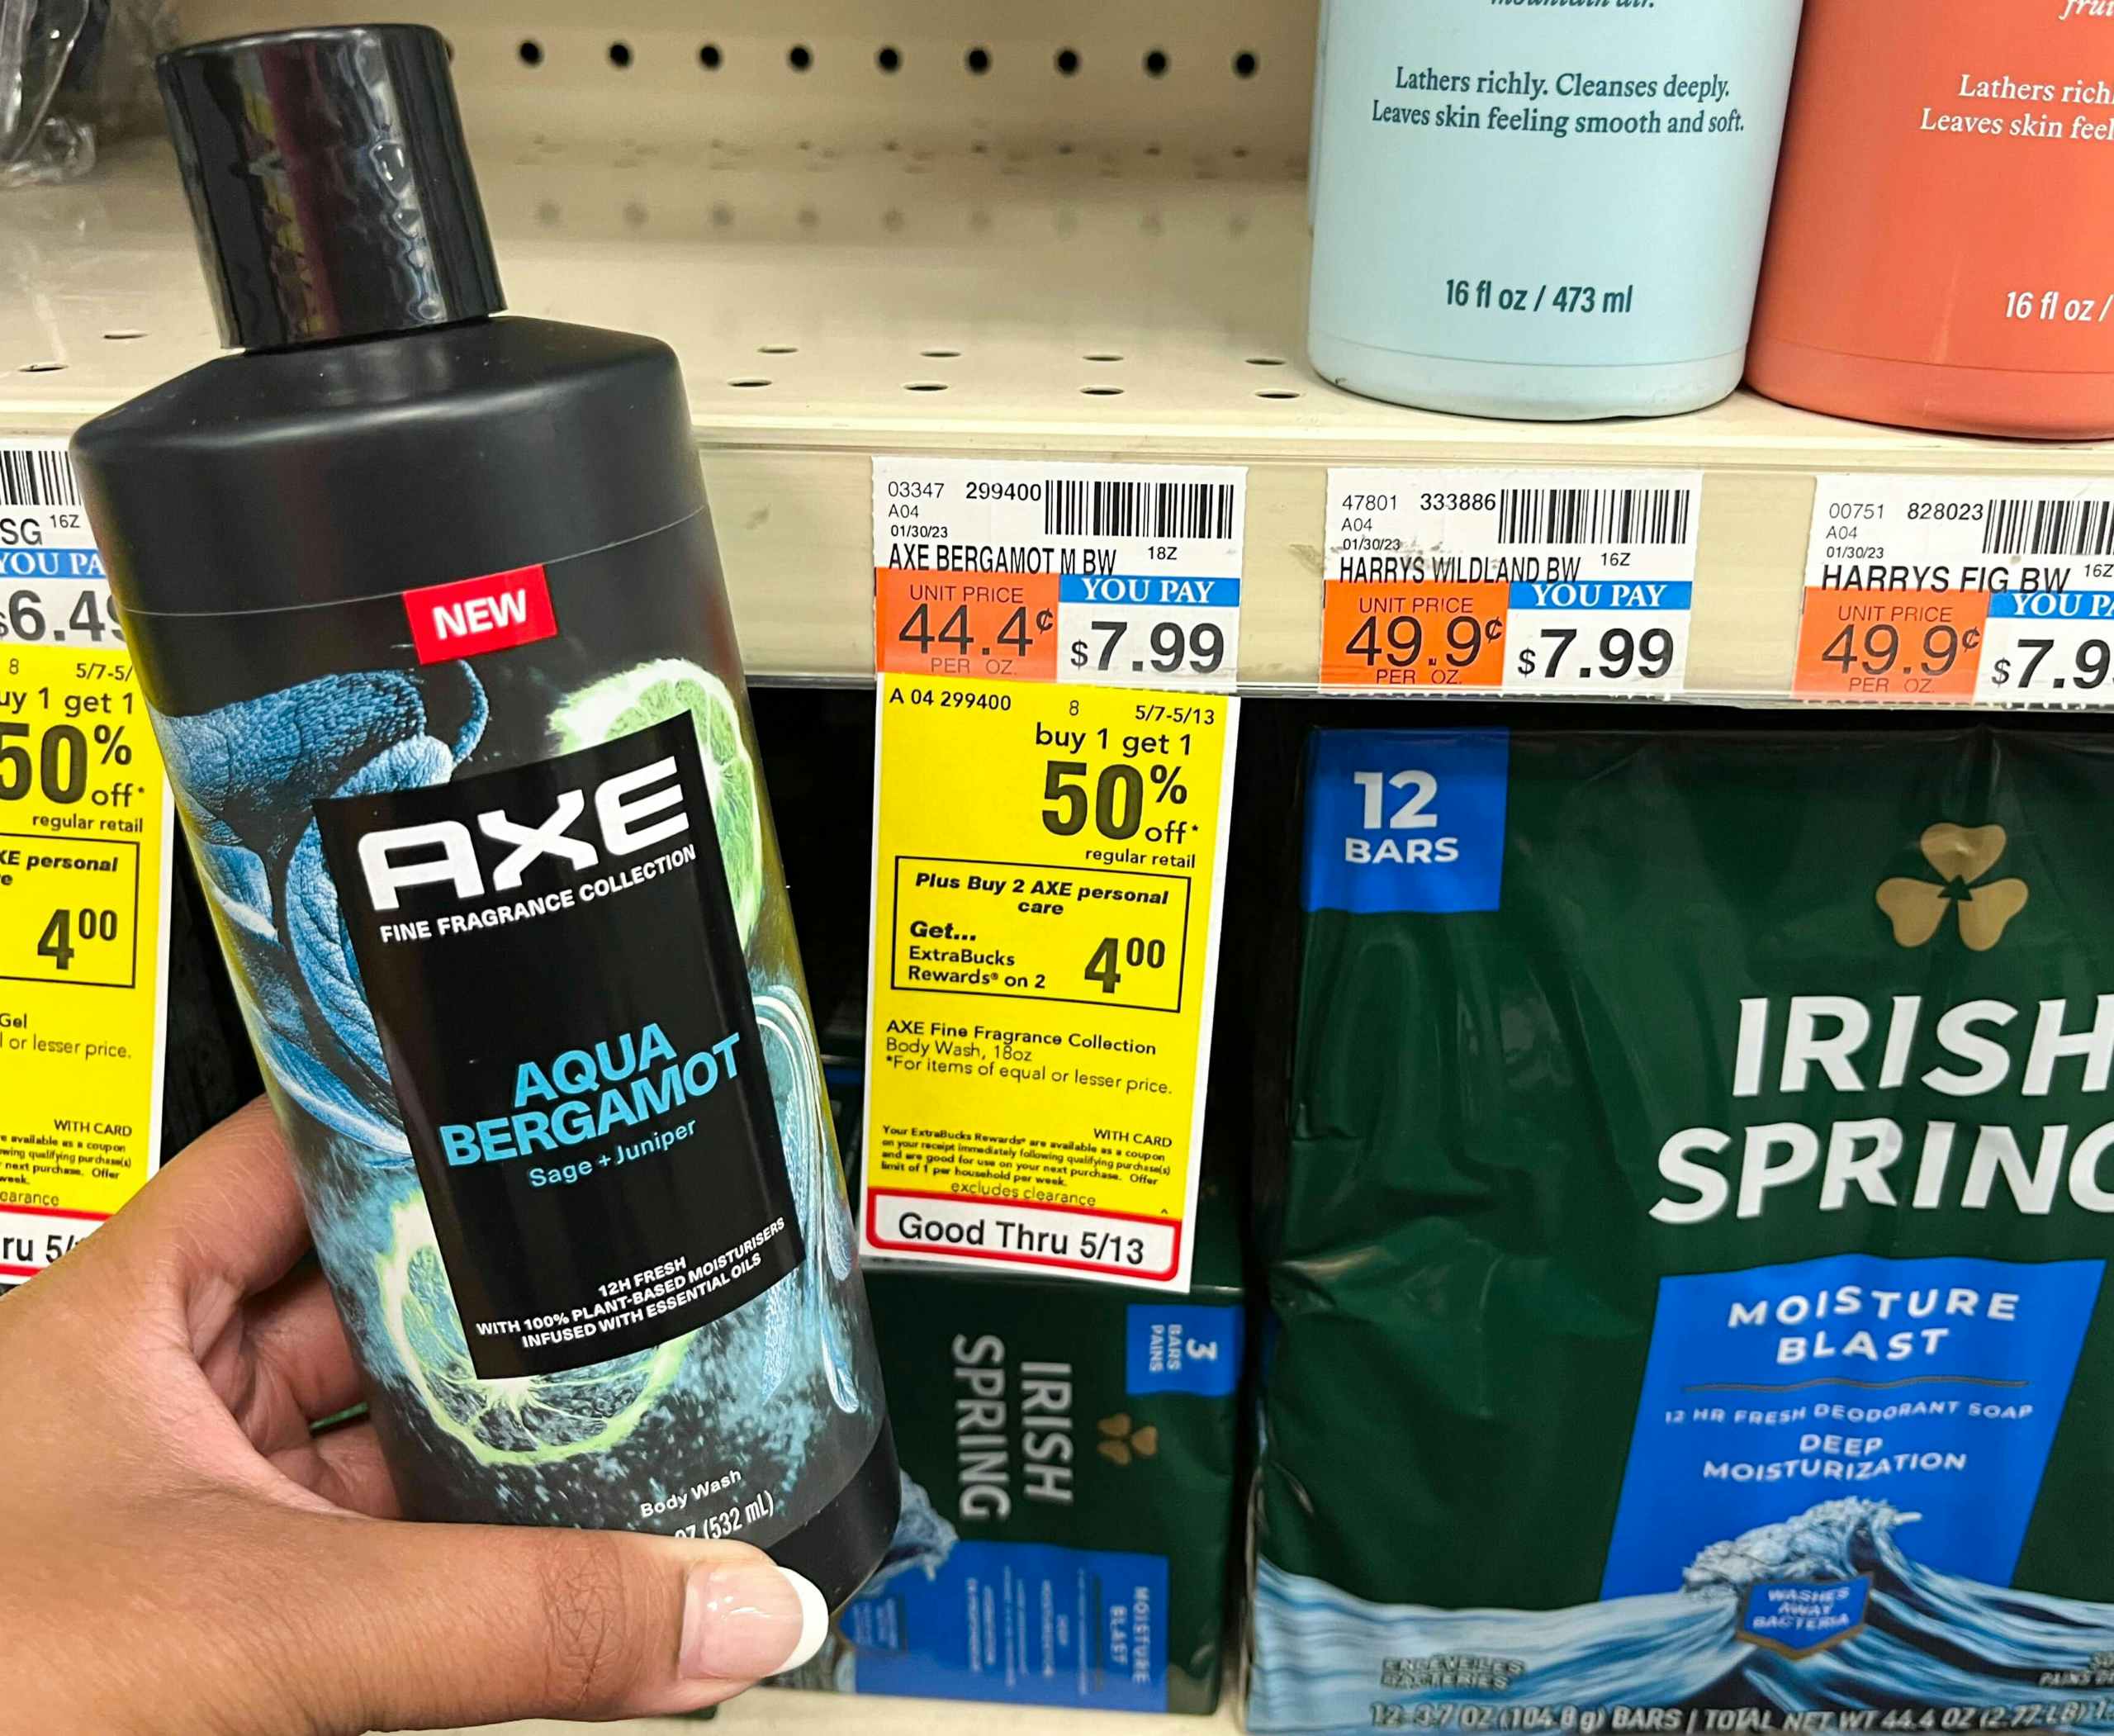 hand holding bottle of Axe body wash next to sales tag